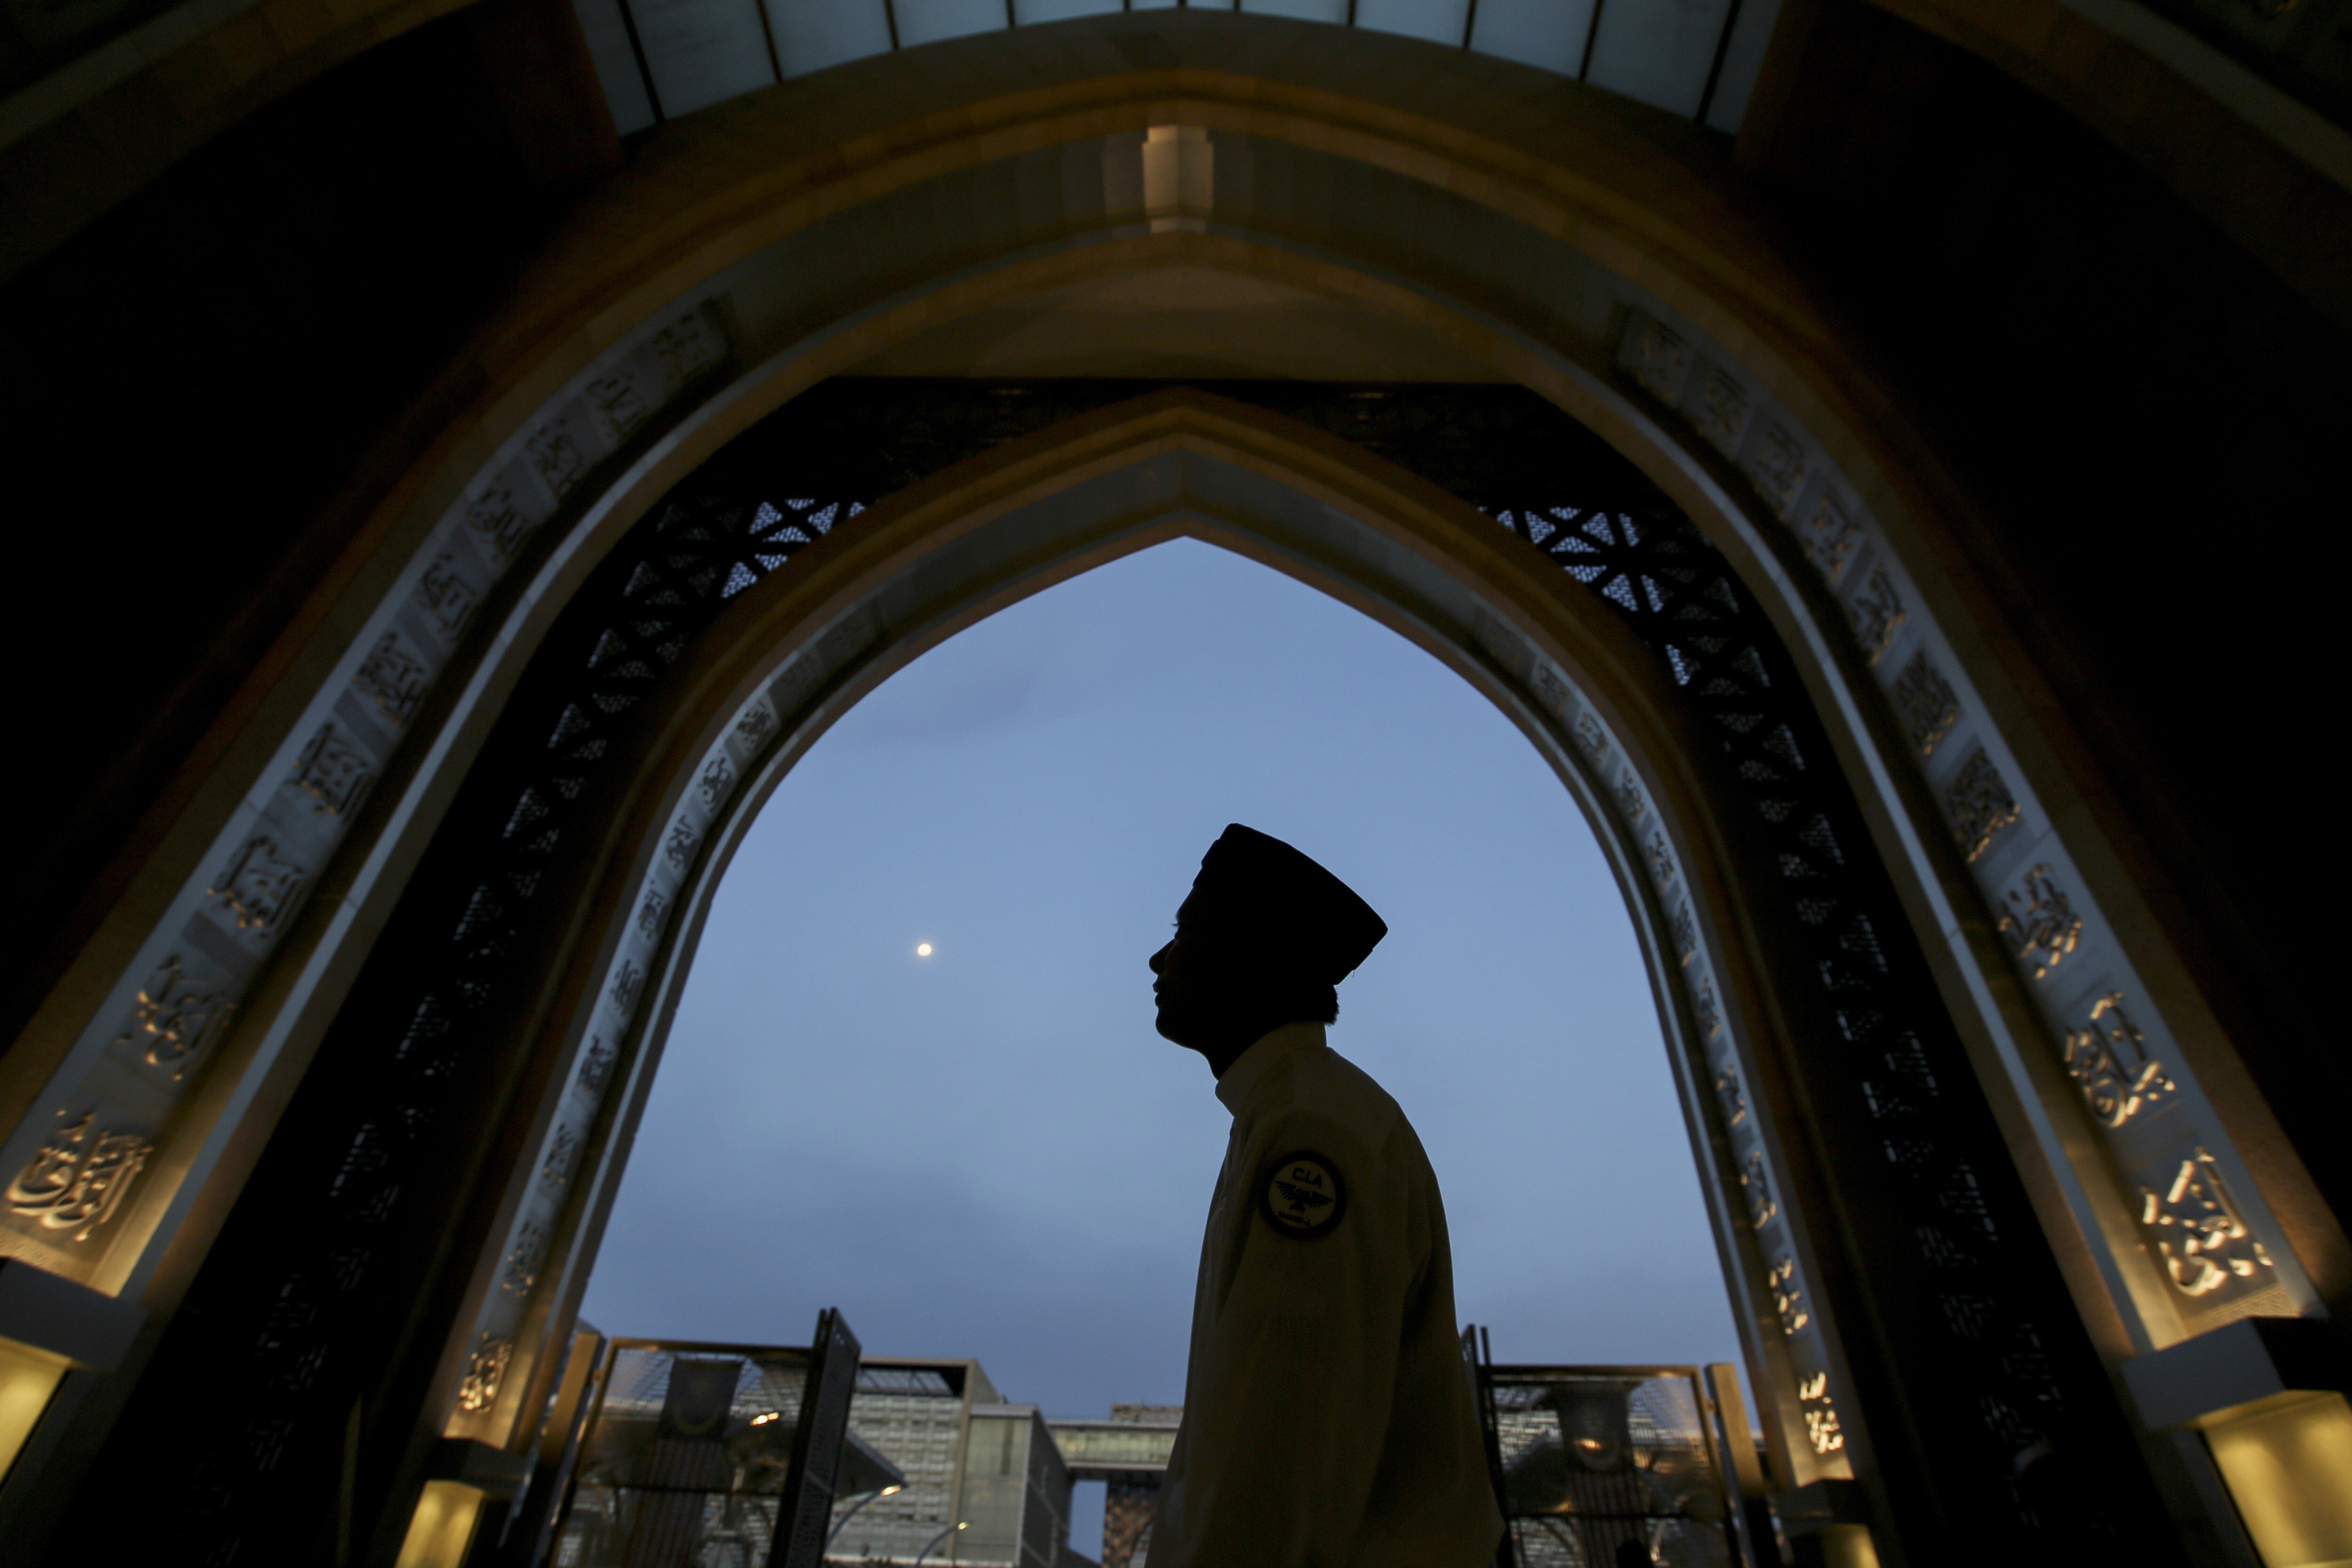 A worshipper arrives at a mosque in Kuala Lumpur during the holy Islamic month of Ramadan. Photo: AP